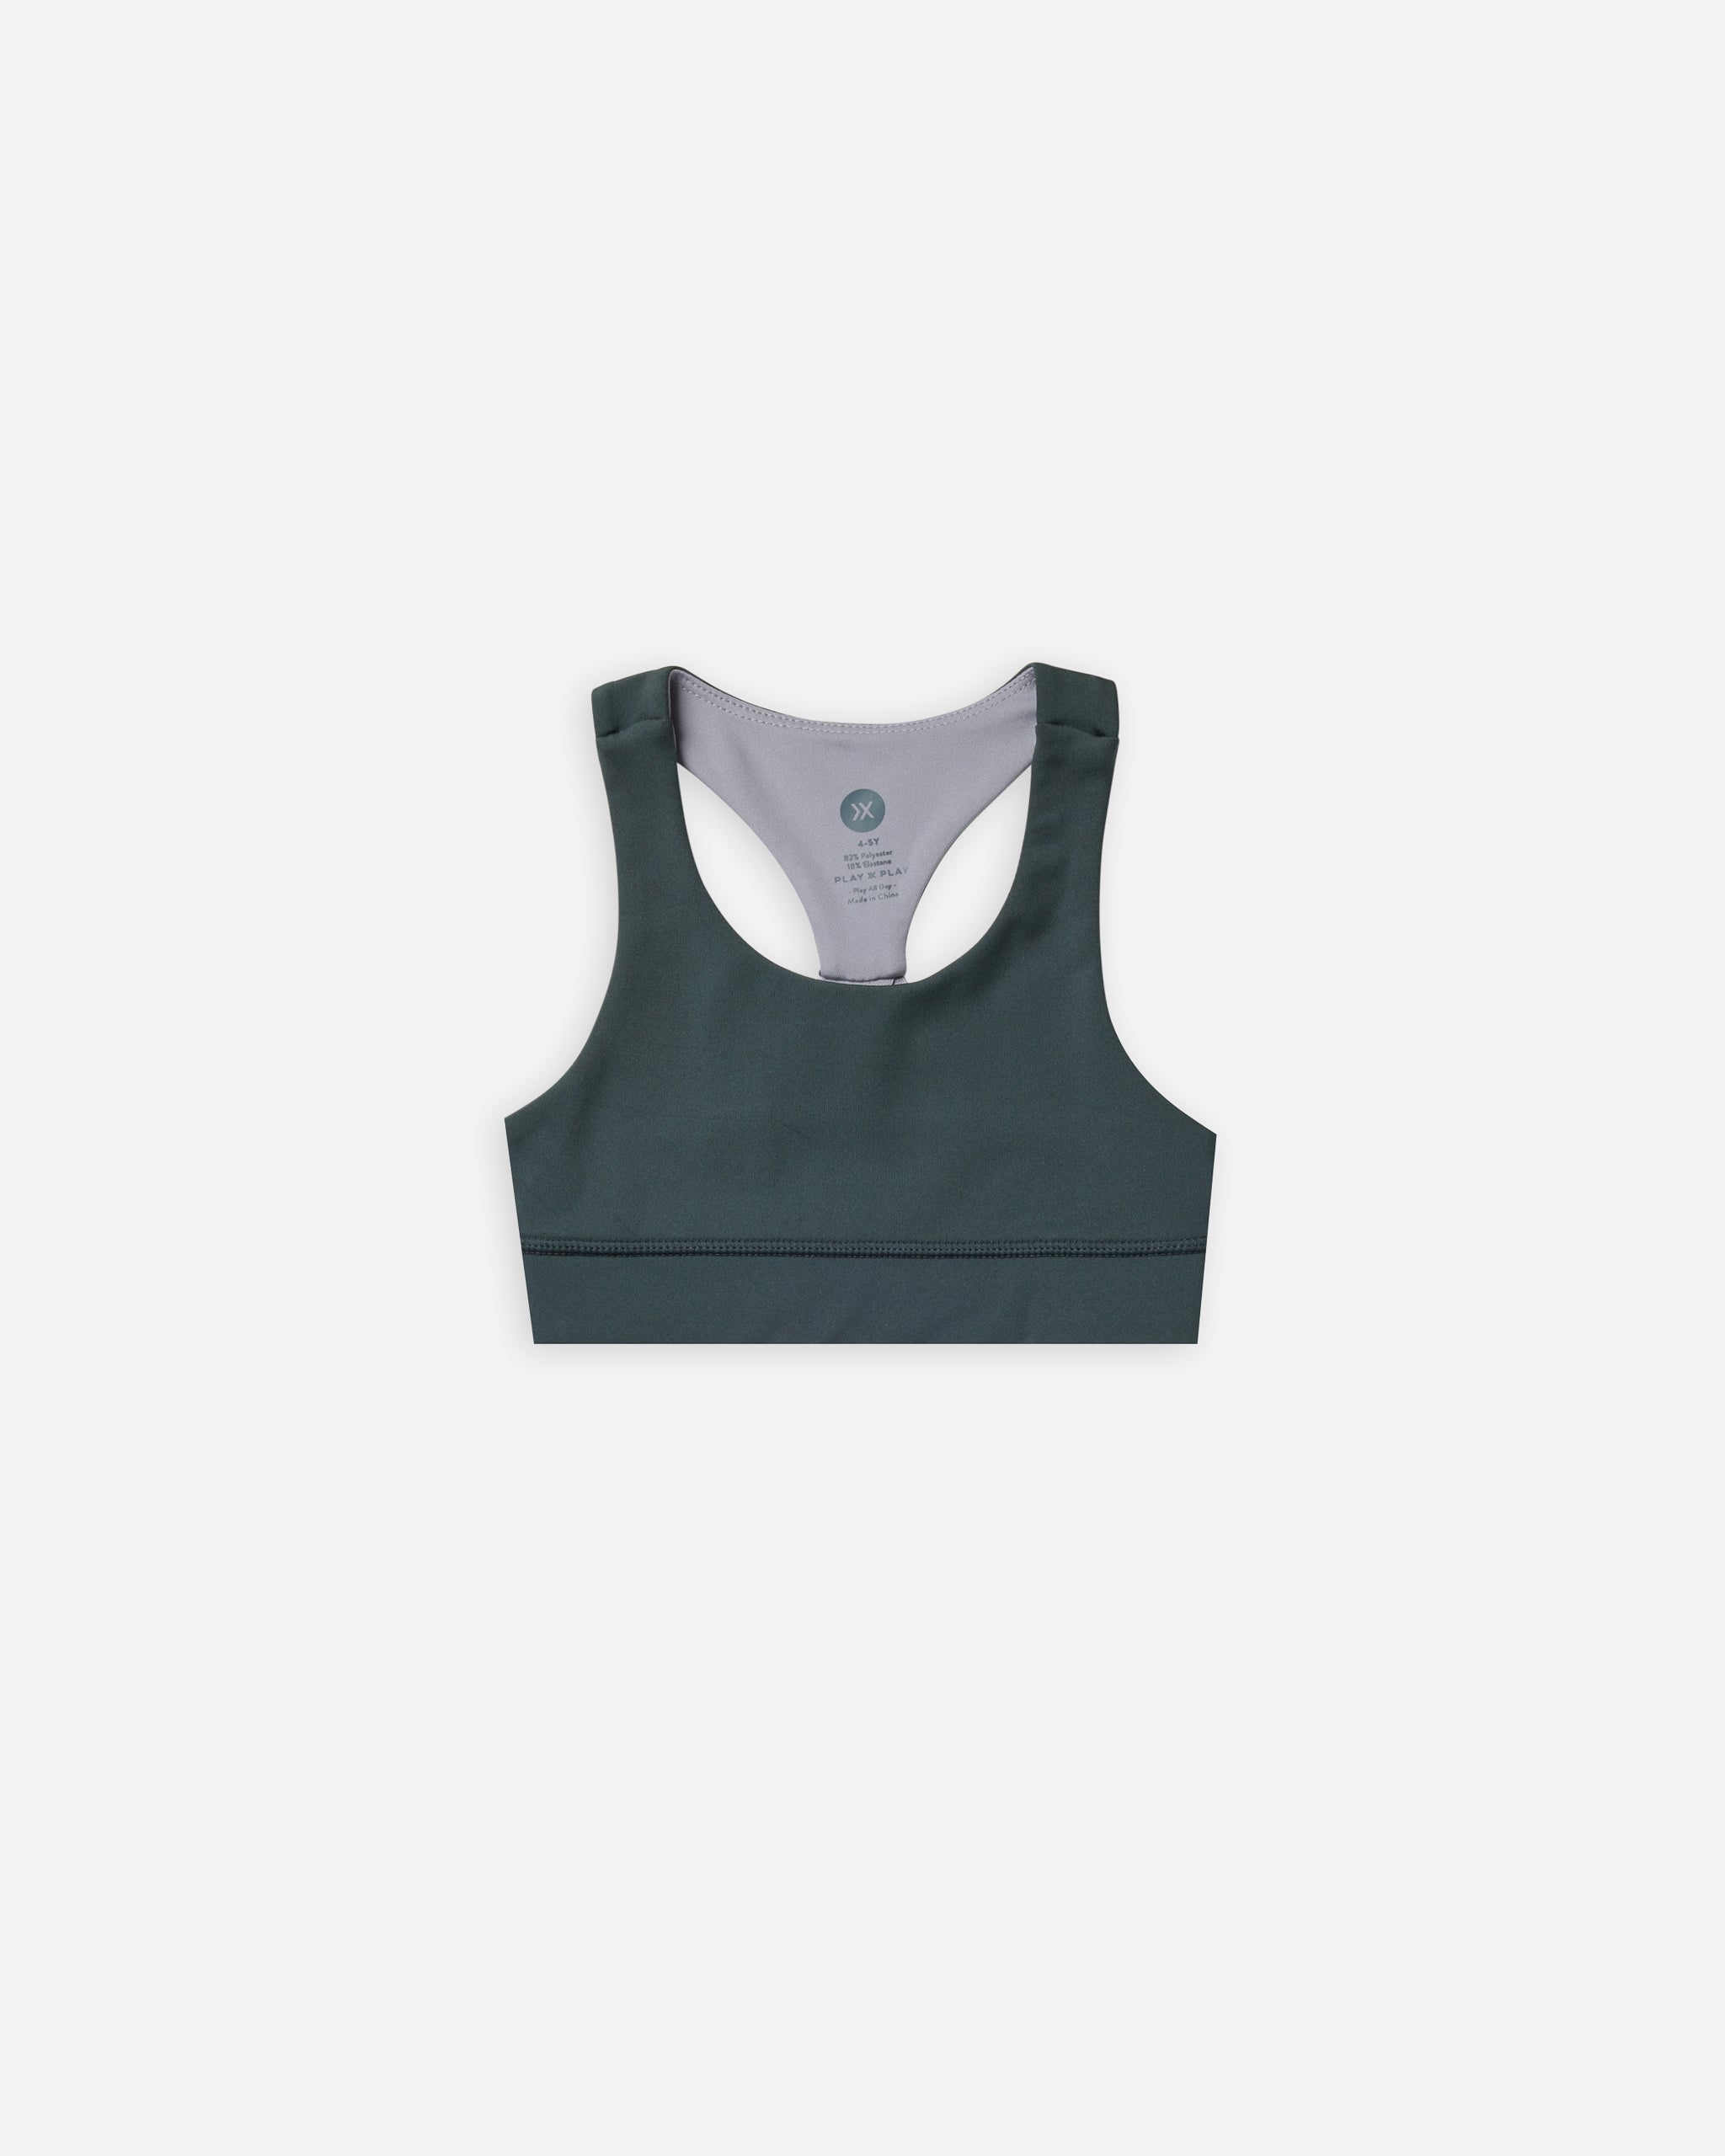 Racerback Sports Bra | Indigo - Rylee + Cru | Kids Clothes | Trendy Baby Clothes | Modern Infant Outfits |